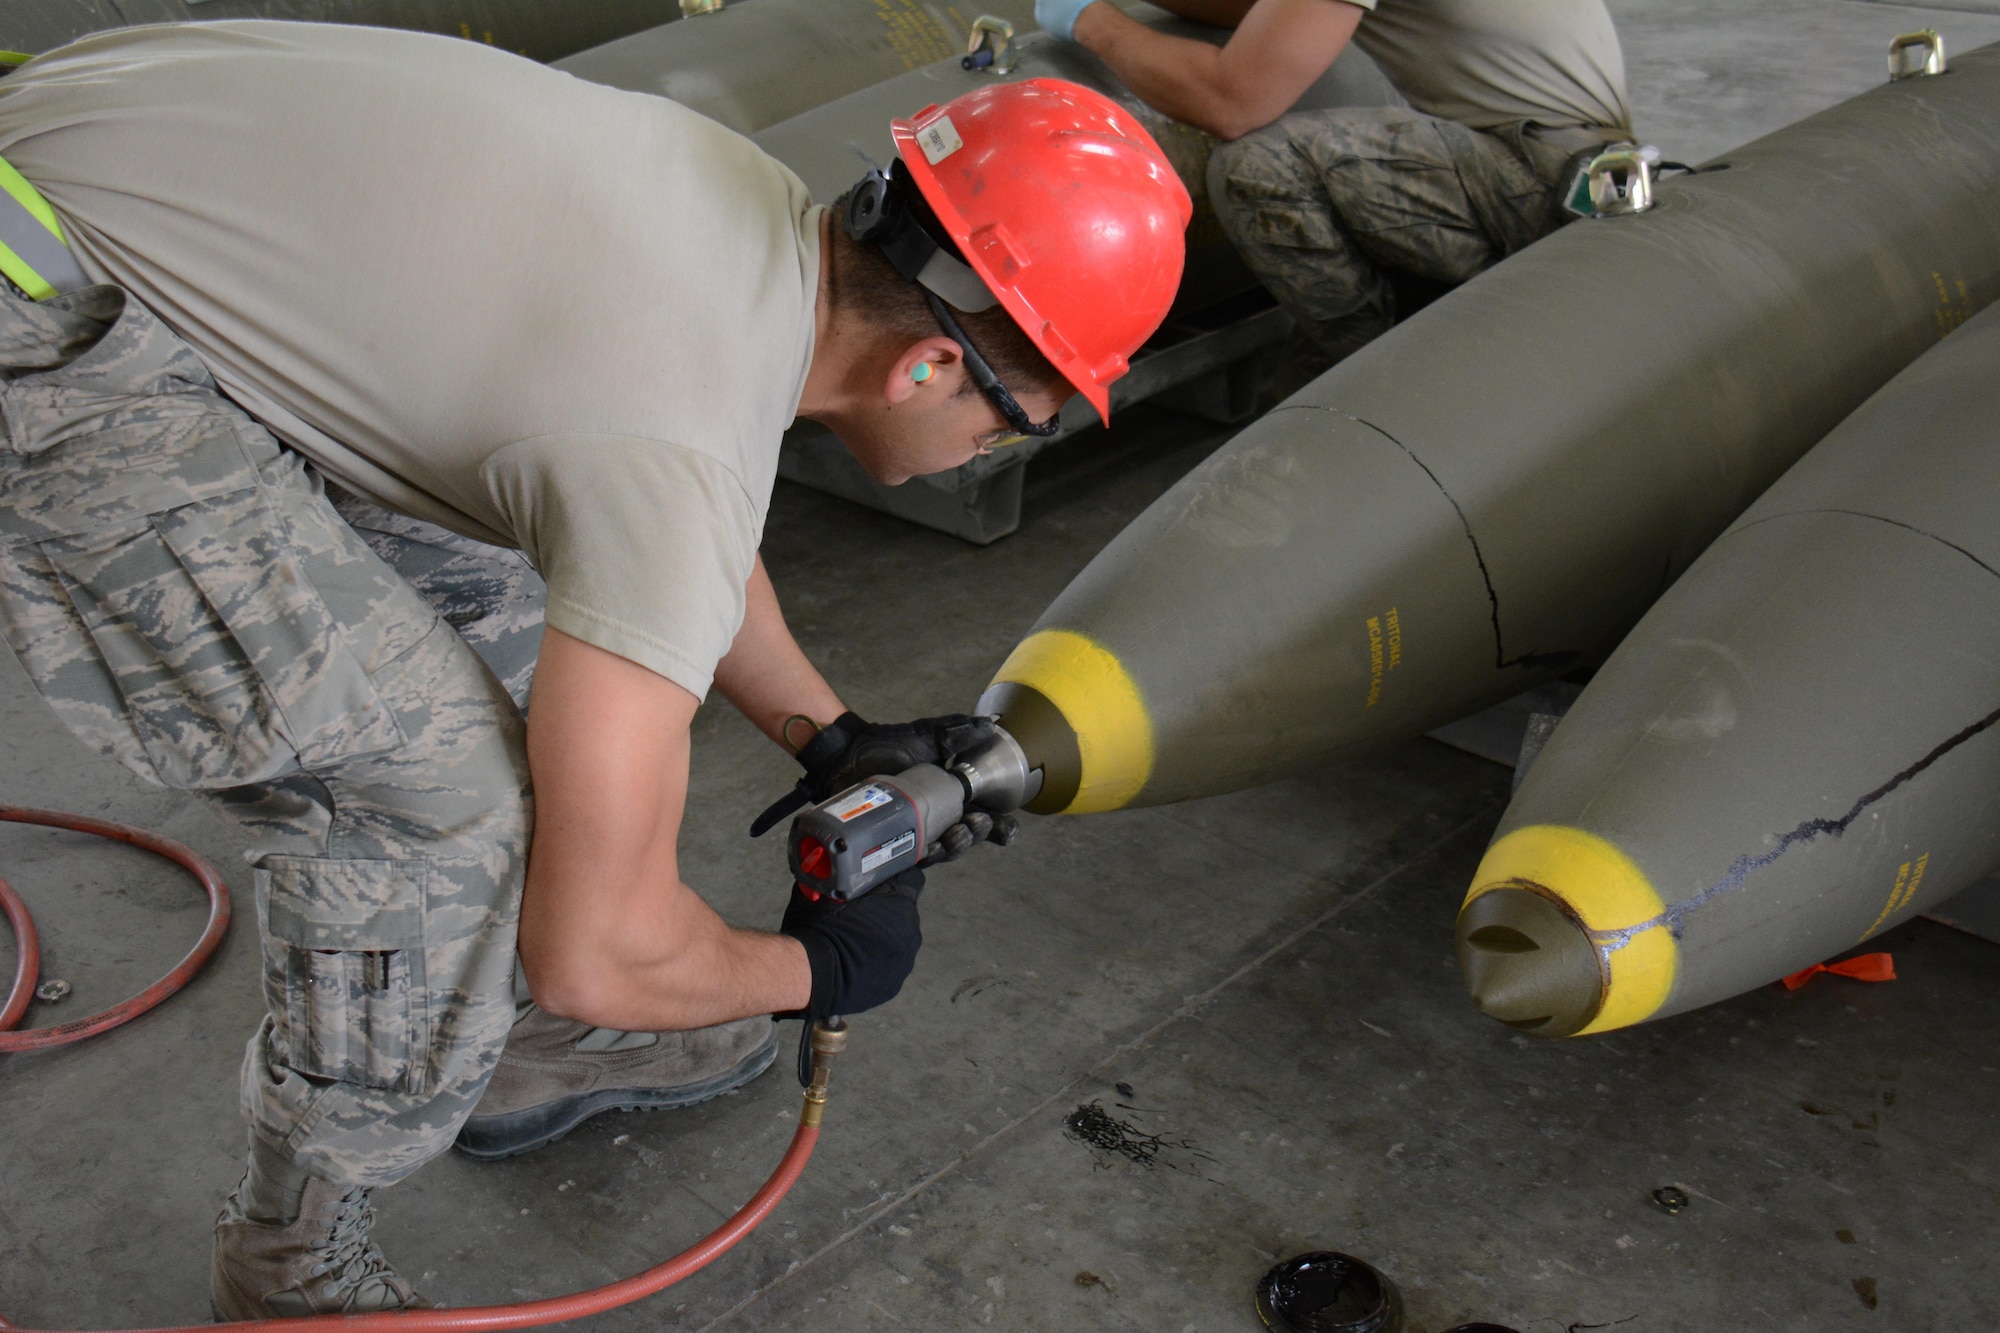 Airman 1st Class Ralph Pangilinan, 379th Expeditionary Maintenance Squadron Munitions Flight, prepares a joint attack direct munition for transport at Al Udeid Air Base, Qatar Dec. 17. Pangilinan, a native of San Diego, California, is a part of a record-setting munitions team that has built nearly 4,000 bombs since July 2015. (U.S. Air Force photo by Tech. Sgt. James Hodgman/Released)